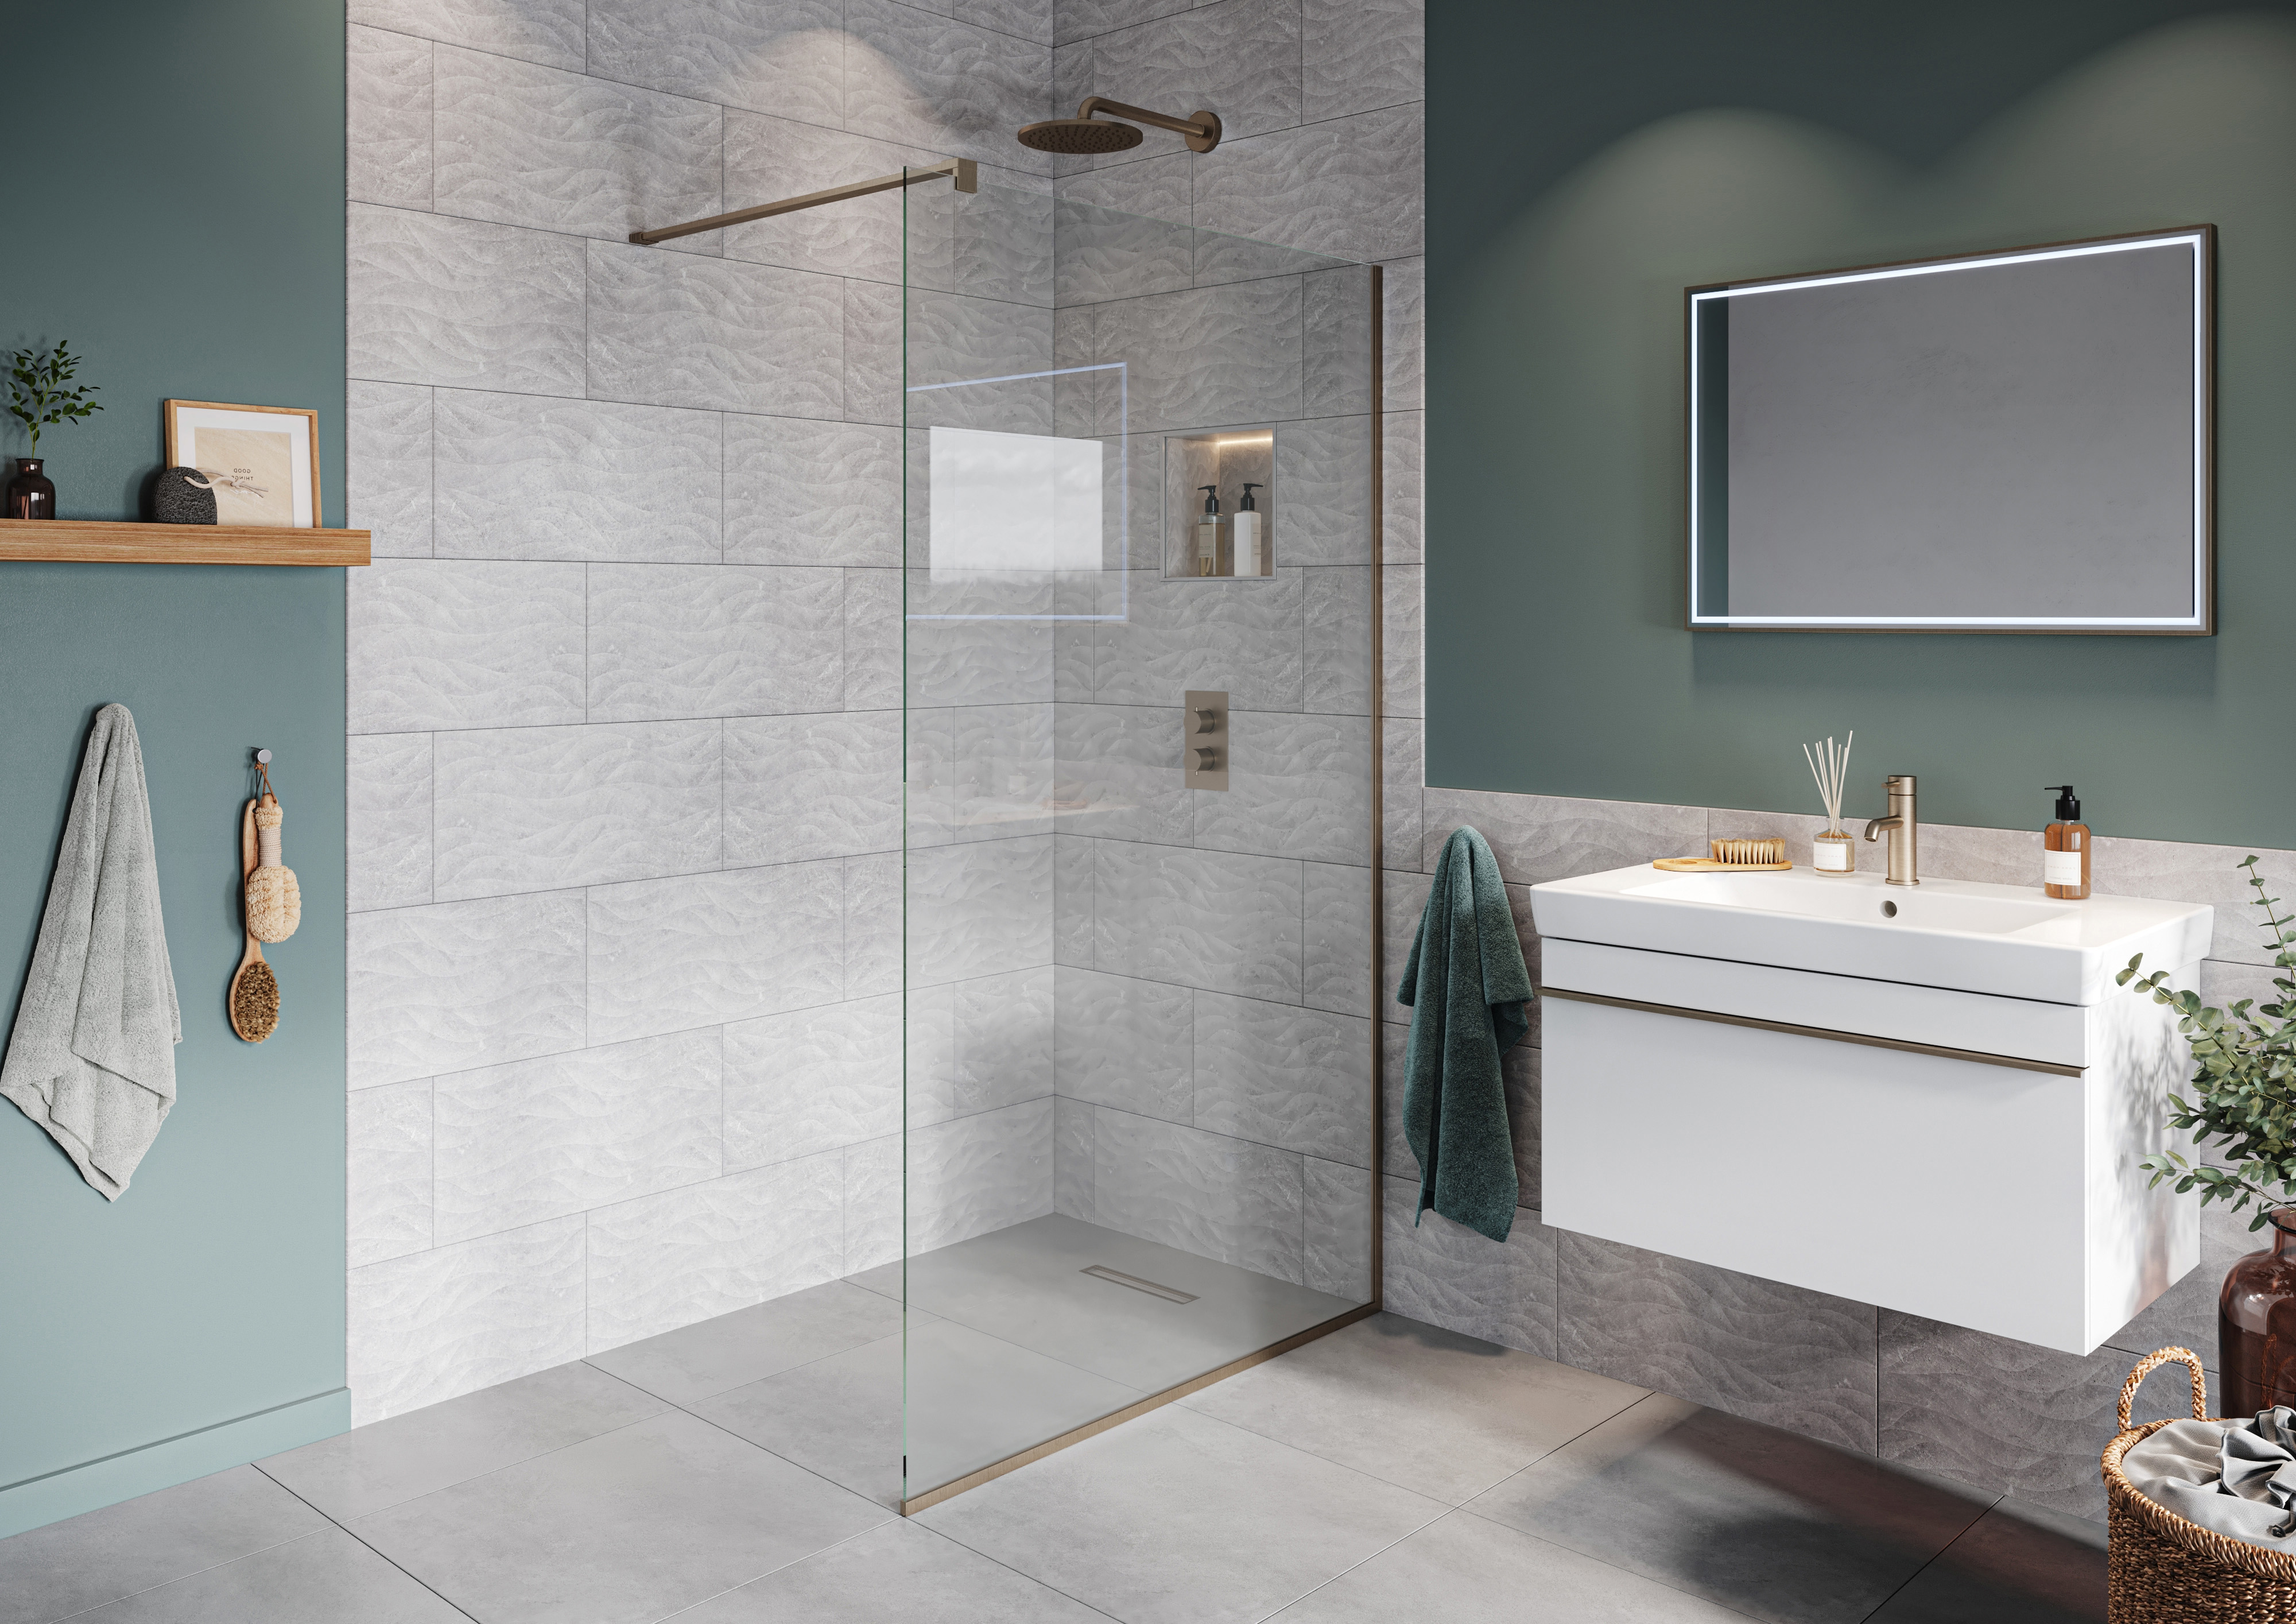 Hadleigh 8mm Brushed Nickel Frameless Wetroom Screen with Wall Arm - 700mm